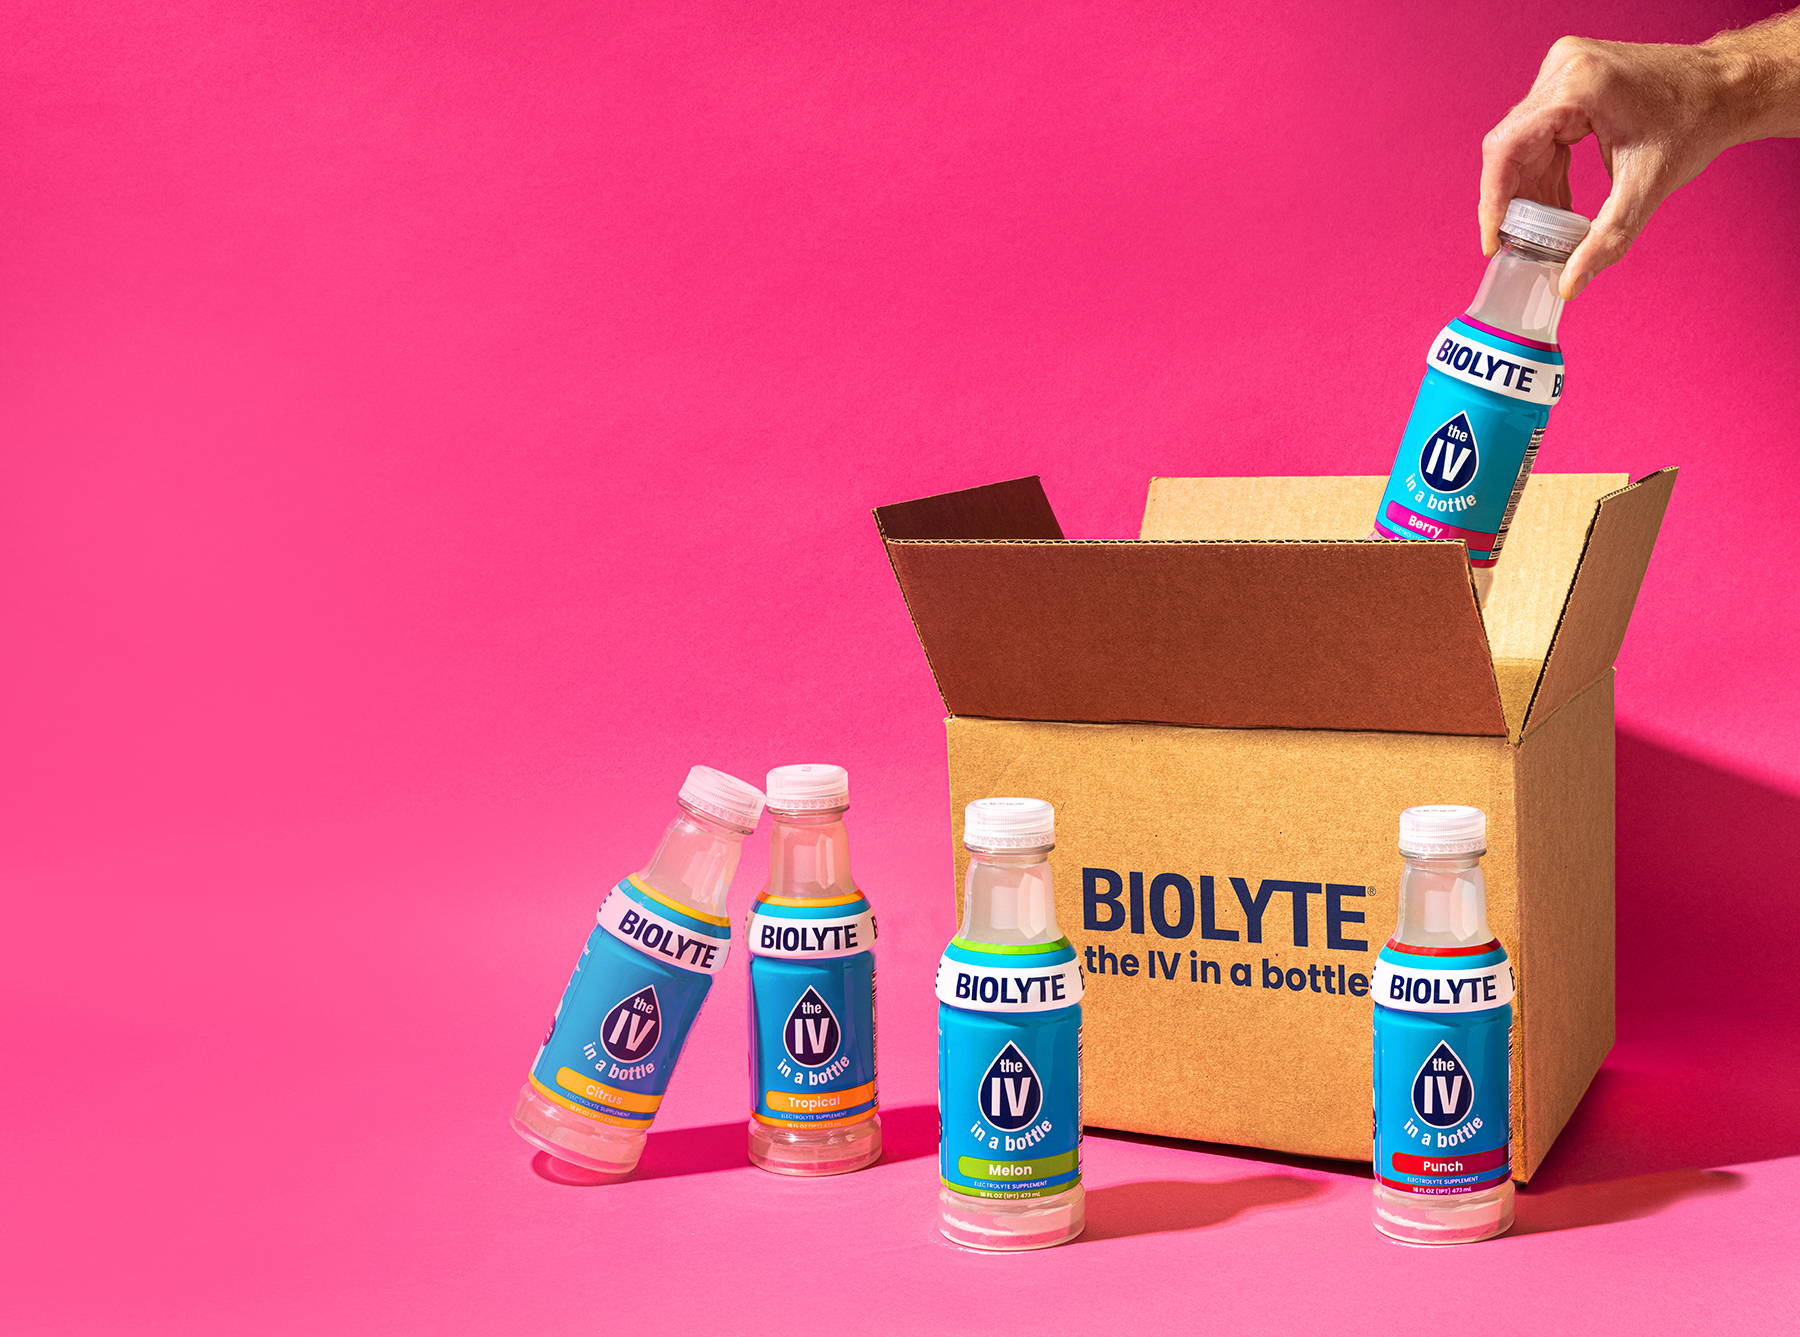 Subscribe and Save 10% on every BIOLYTE order